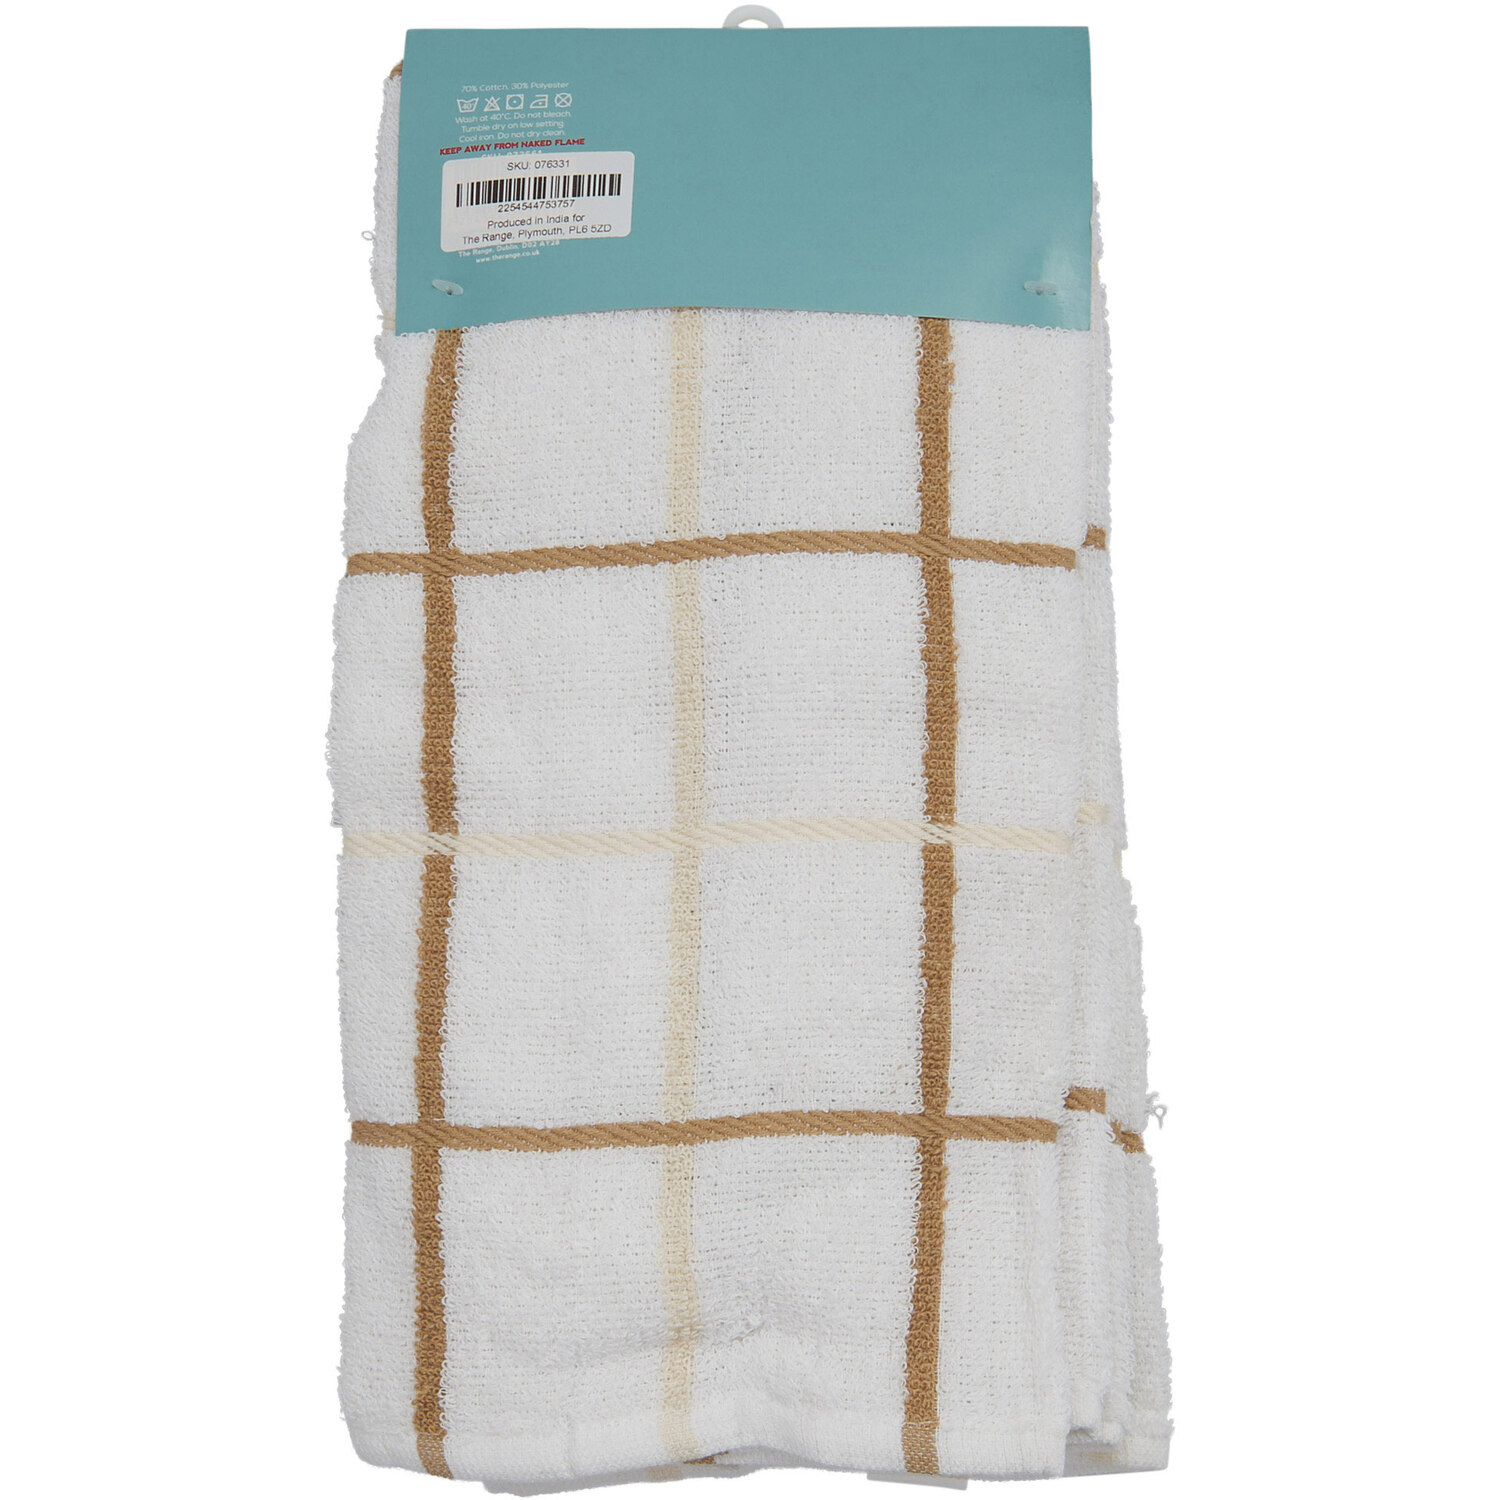 Pack of 2 Extra Large Check Tea Towels - Beige/Grey Image 2